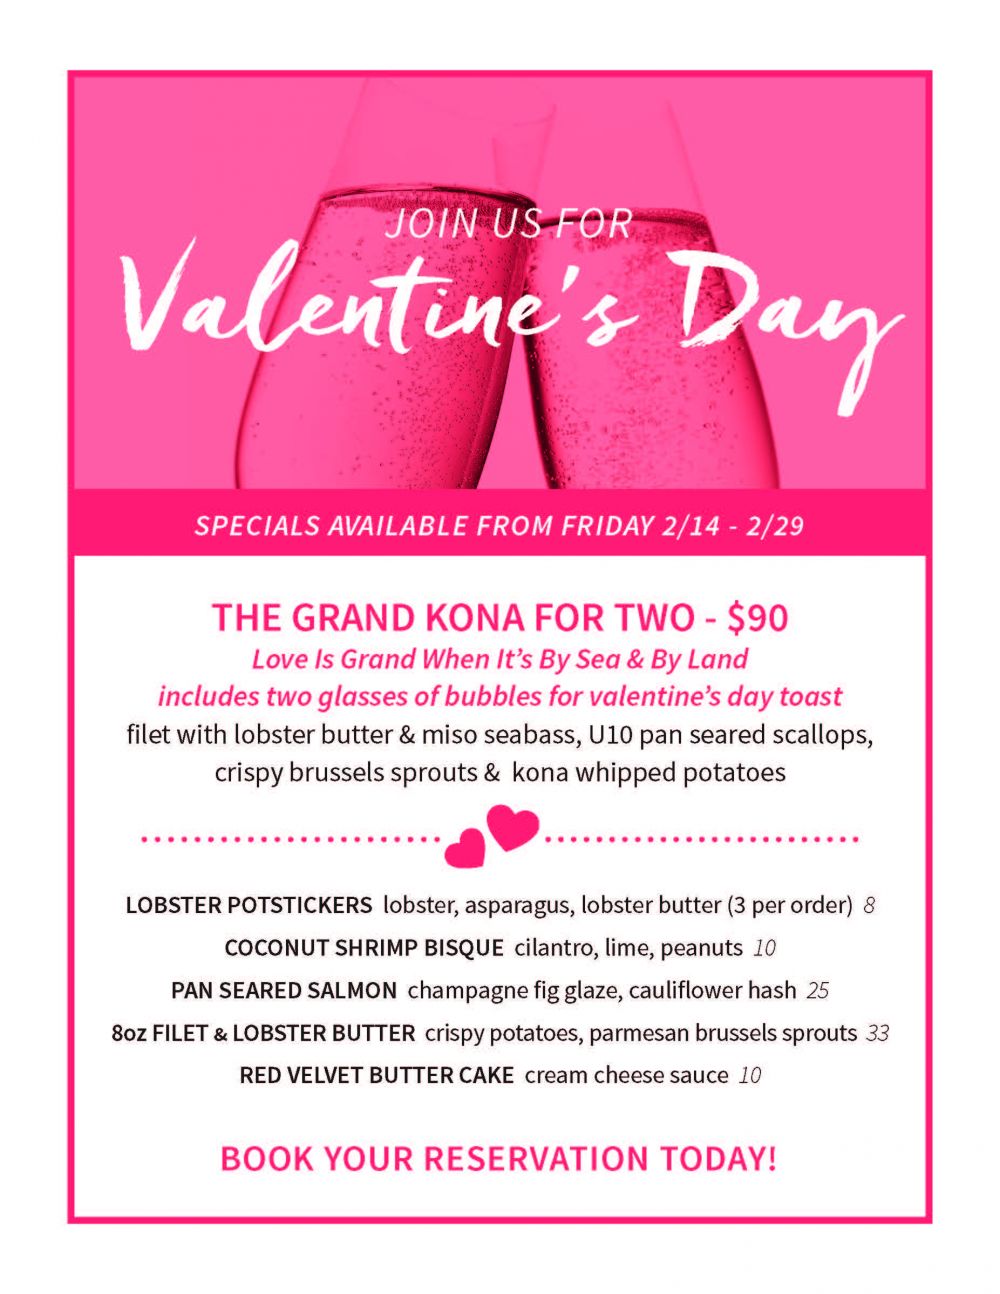 Join us for Valentine's Day 